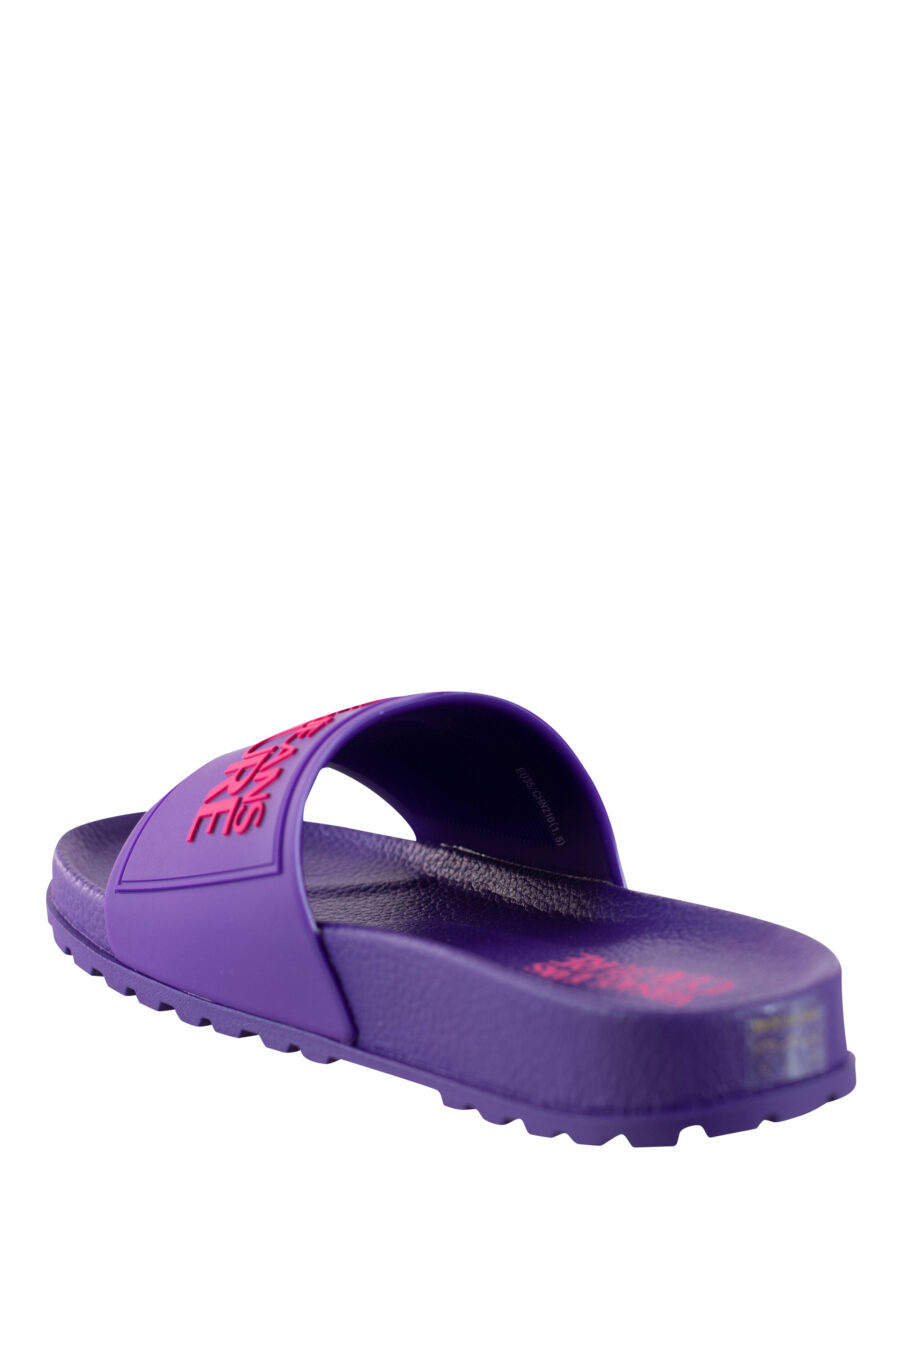 Purple flip-flops with logo and rough sole - IMG 4383